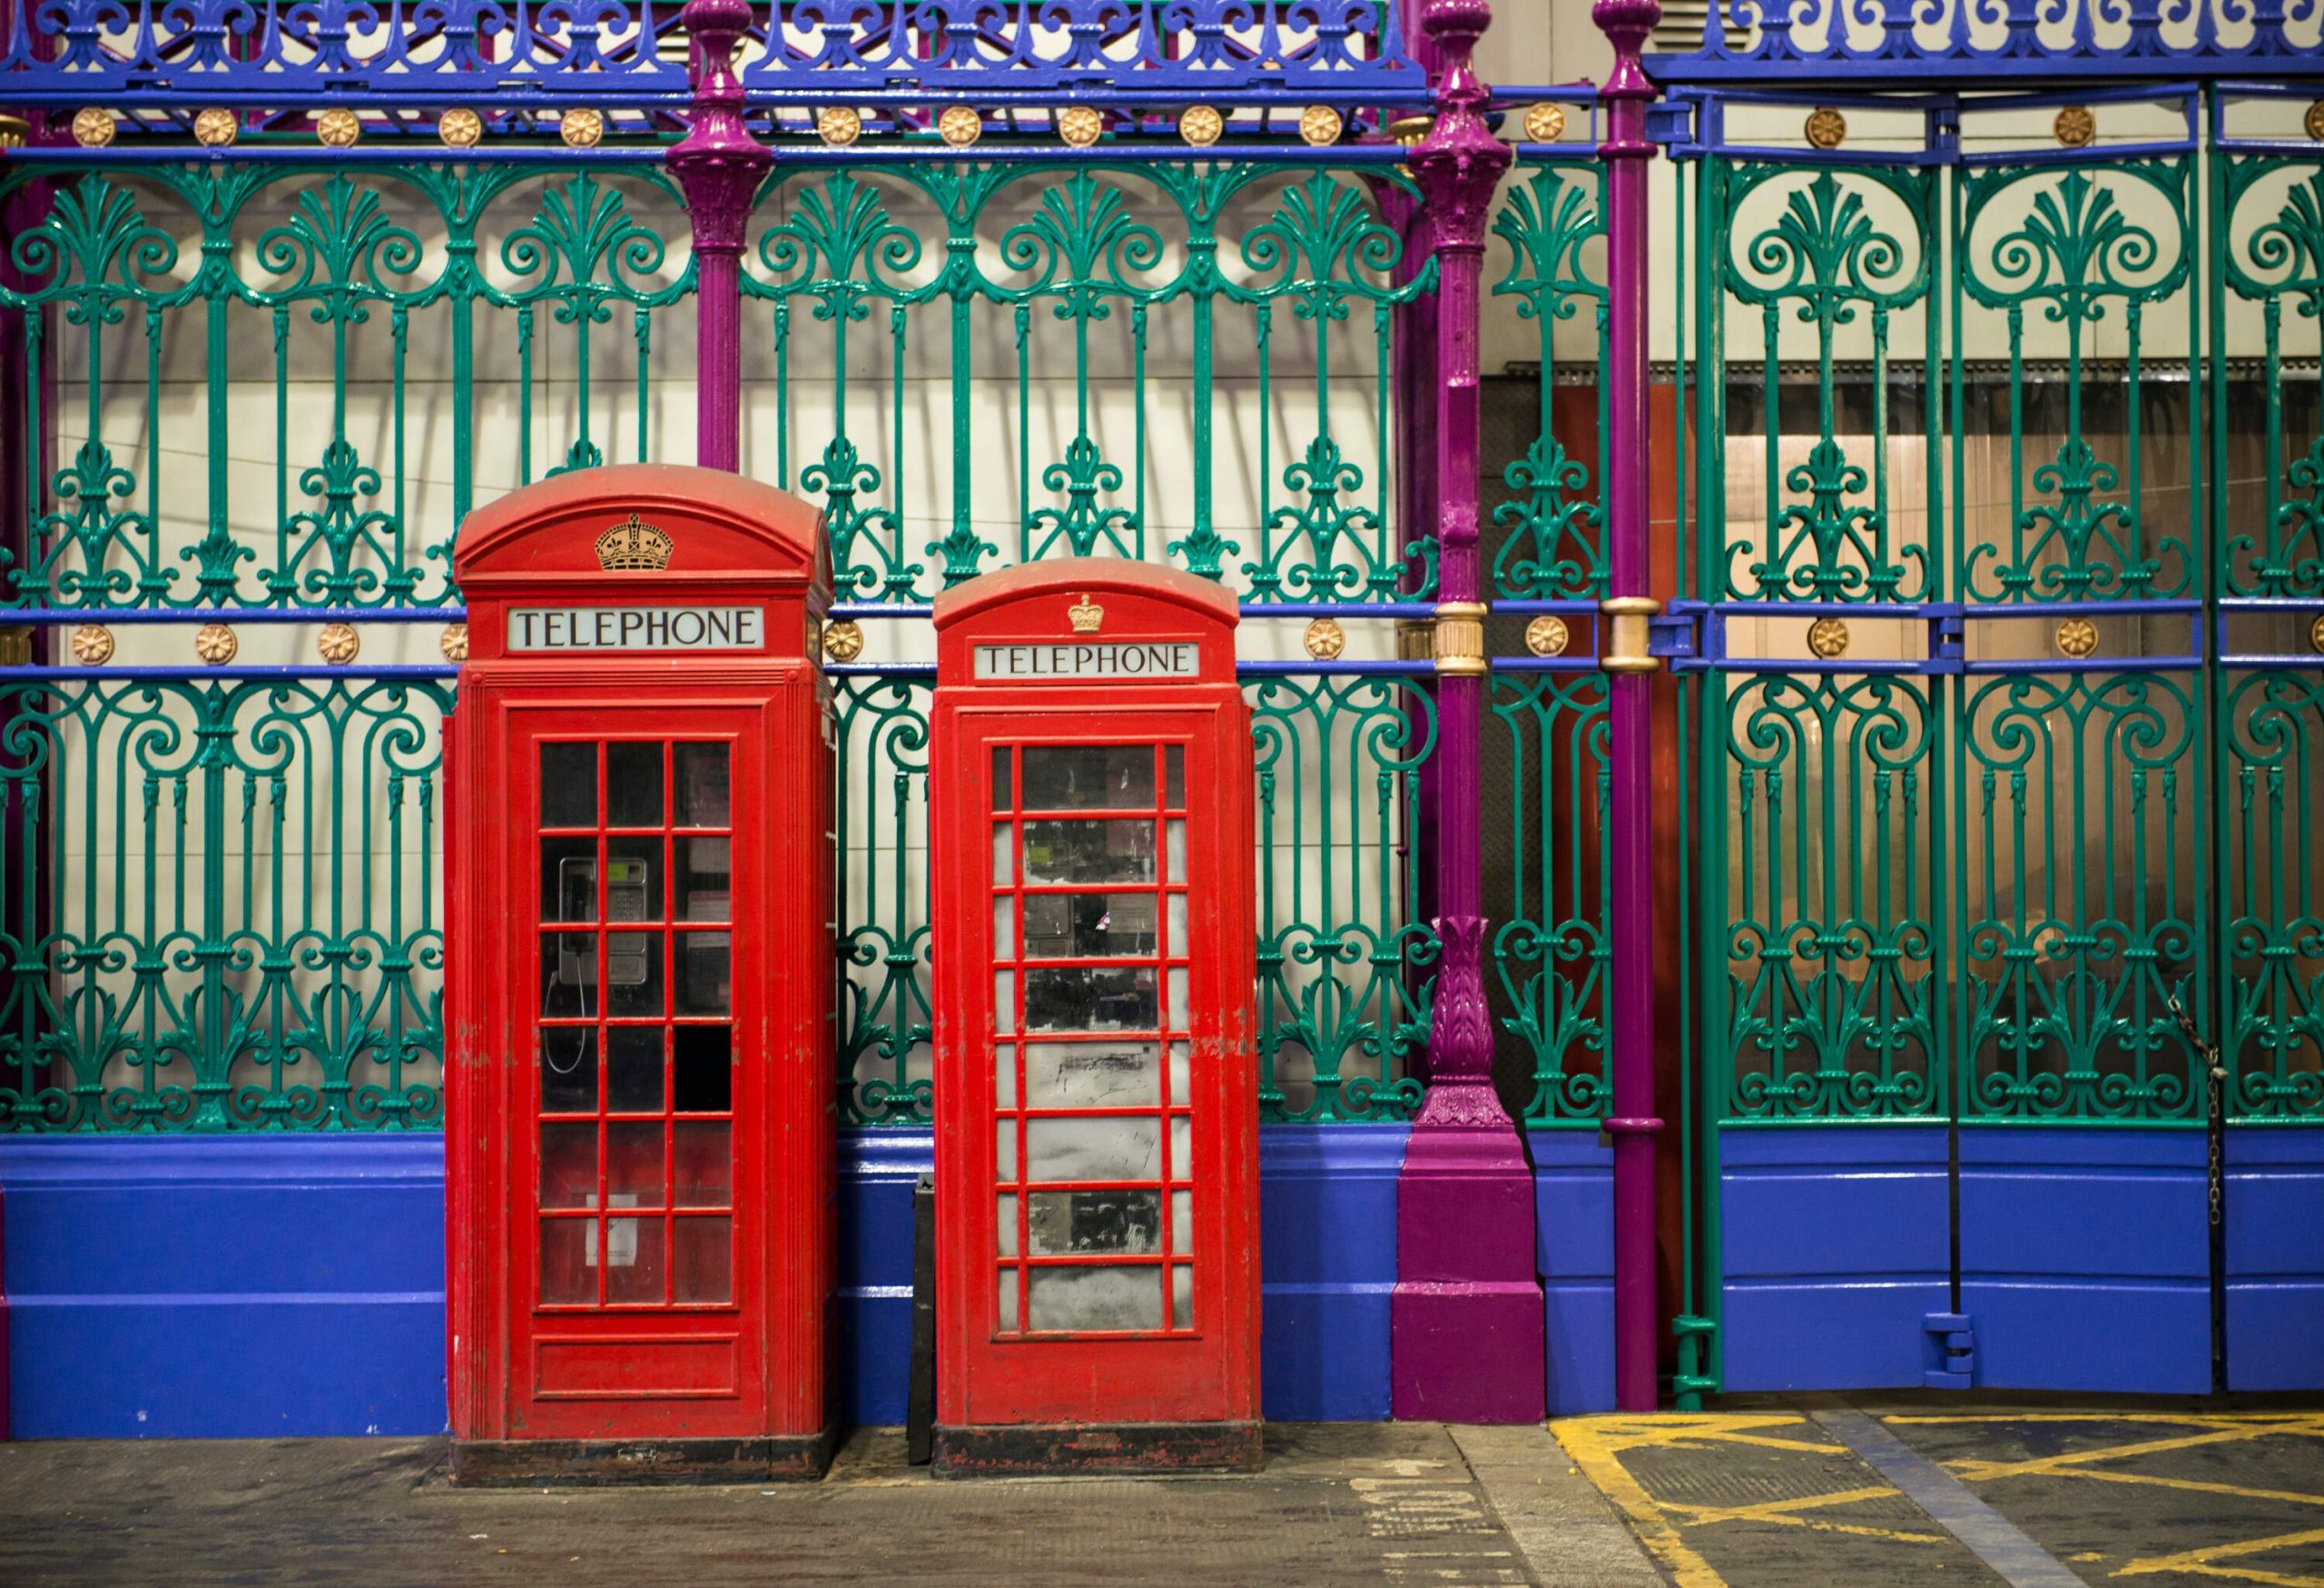 wo red phone booths by the road side adjacent to the green and purple iron fencing of Smithfield market. London UK.